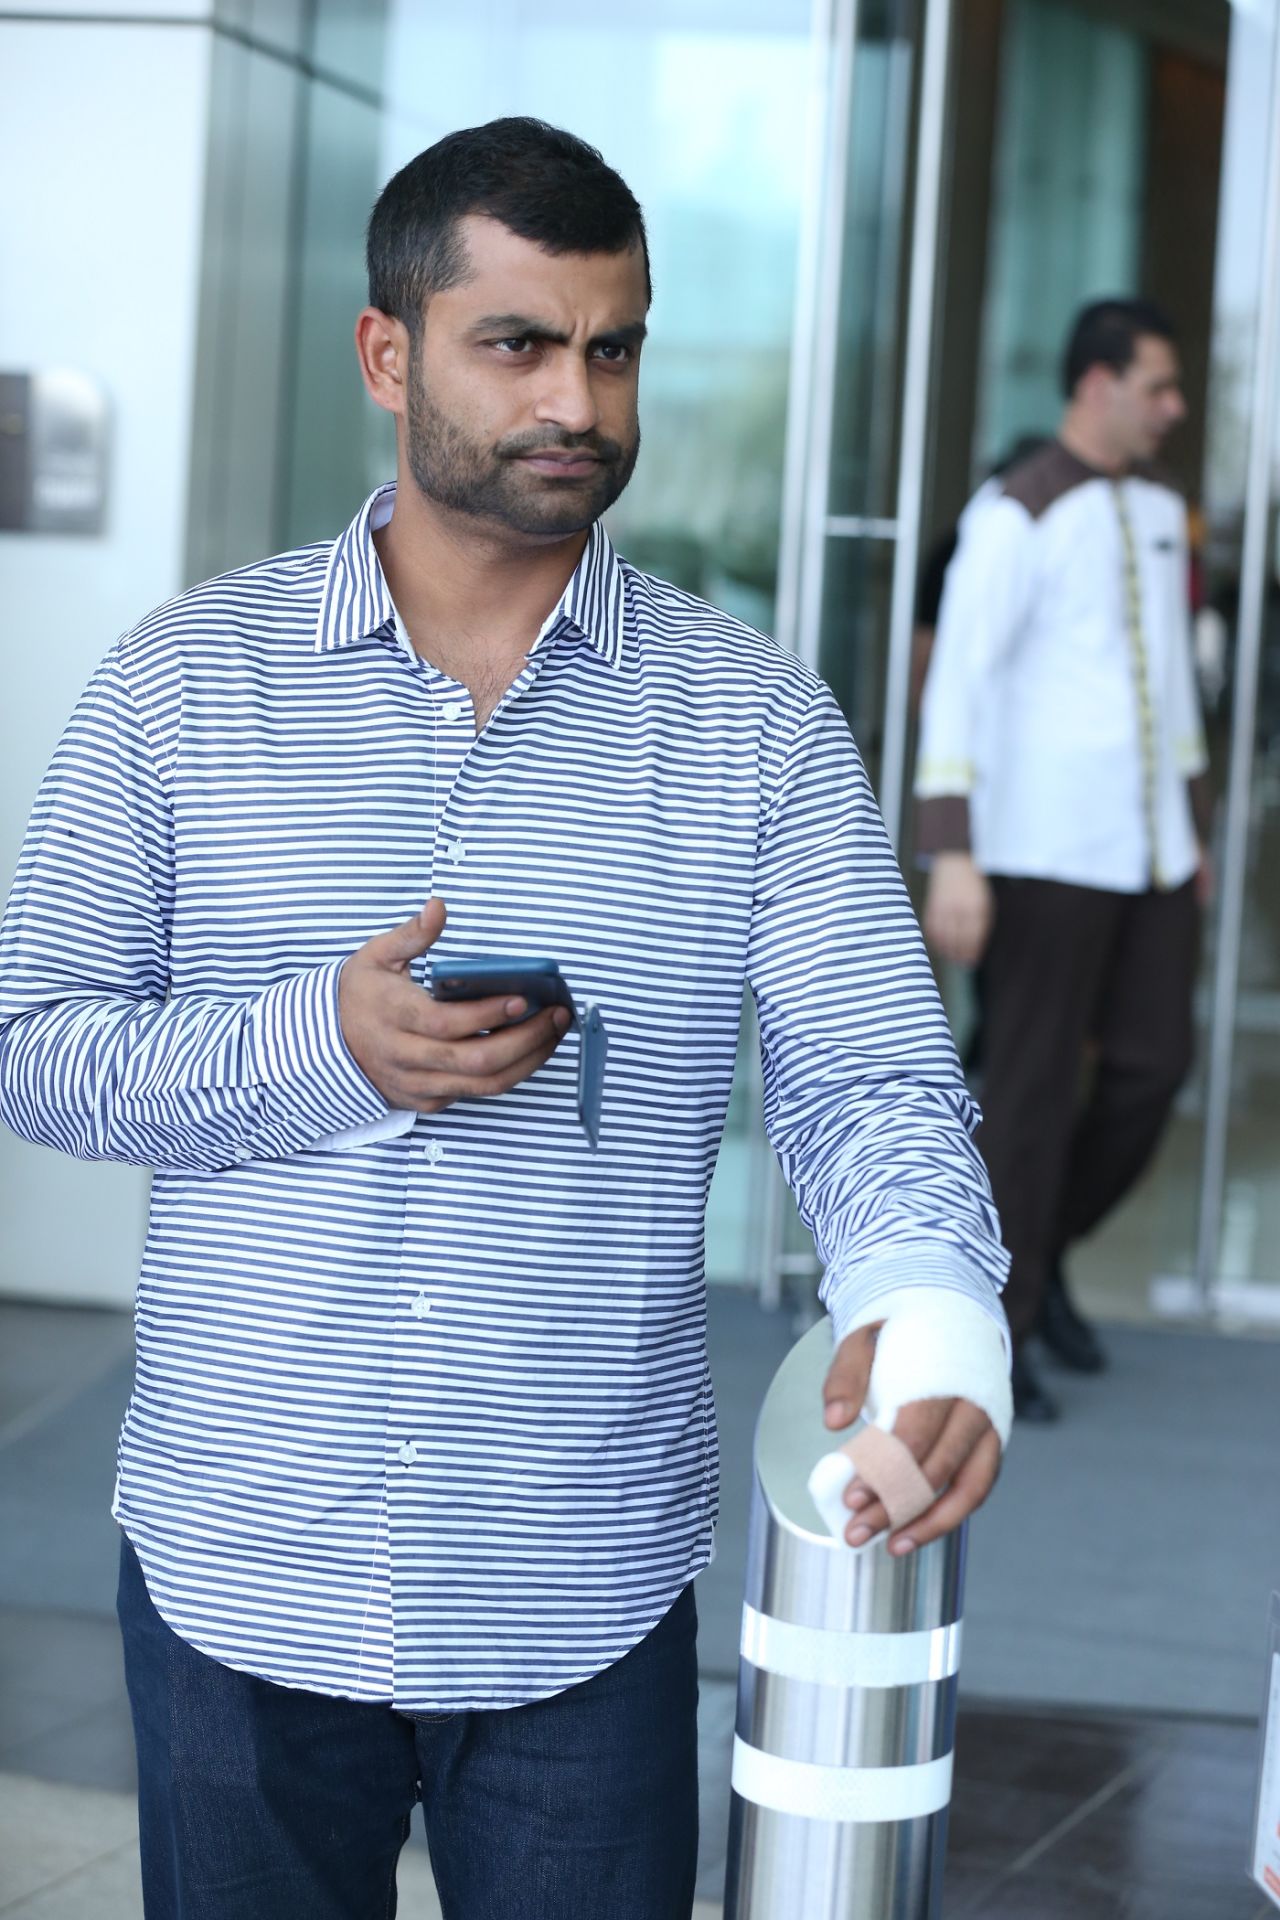 Tamim Iqbal had his fractured left wrist in a plaster, Asia Cup 2018, September 17, 2018